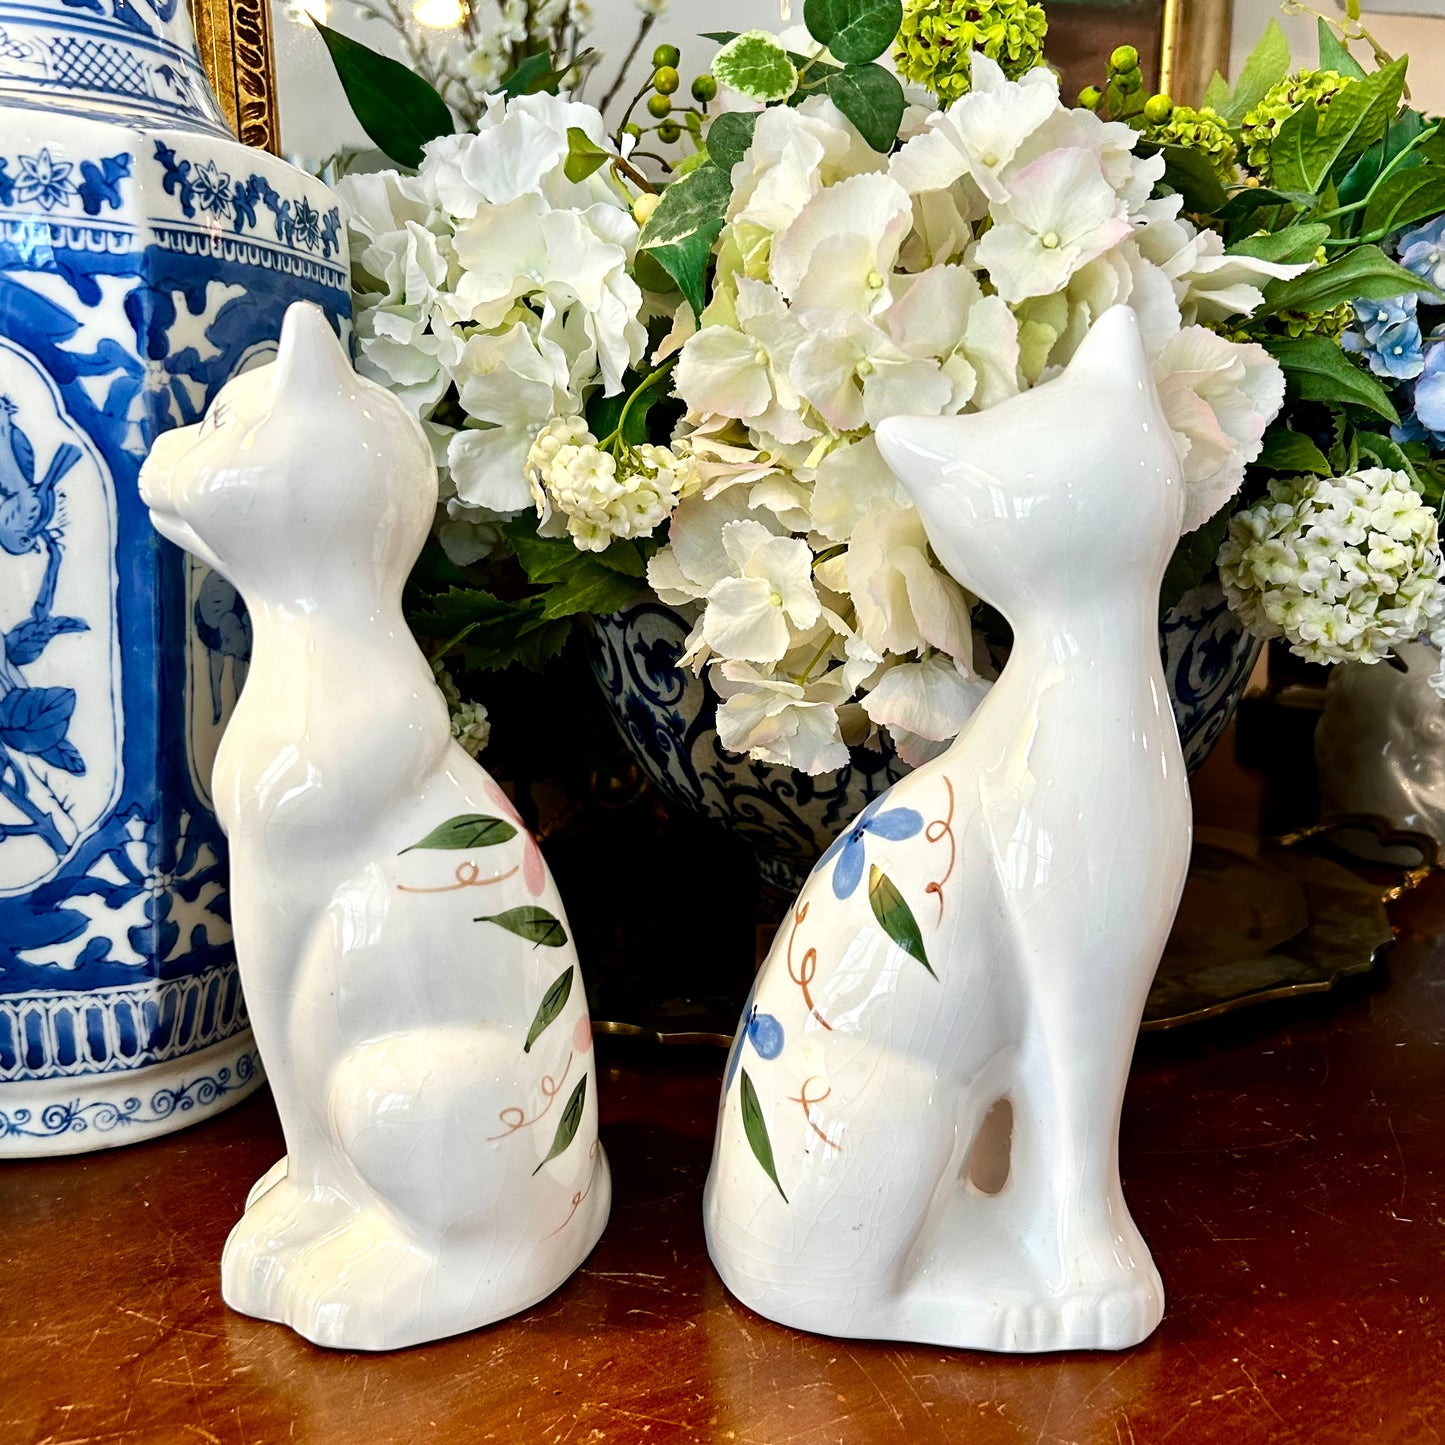 Set of two statuesque style kitty cats statues